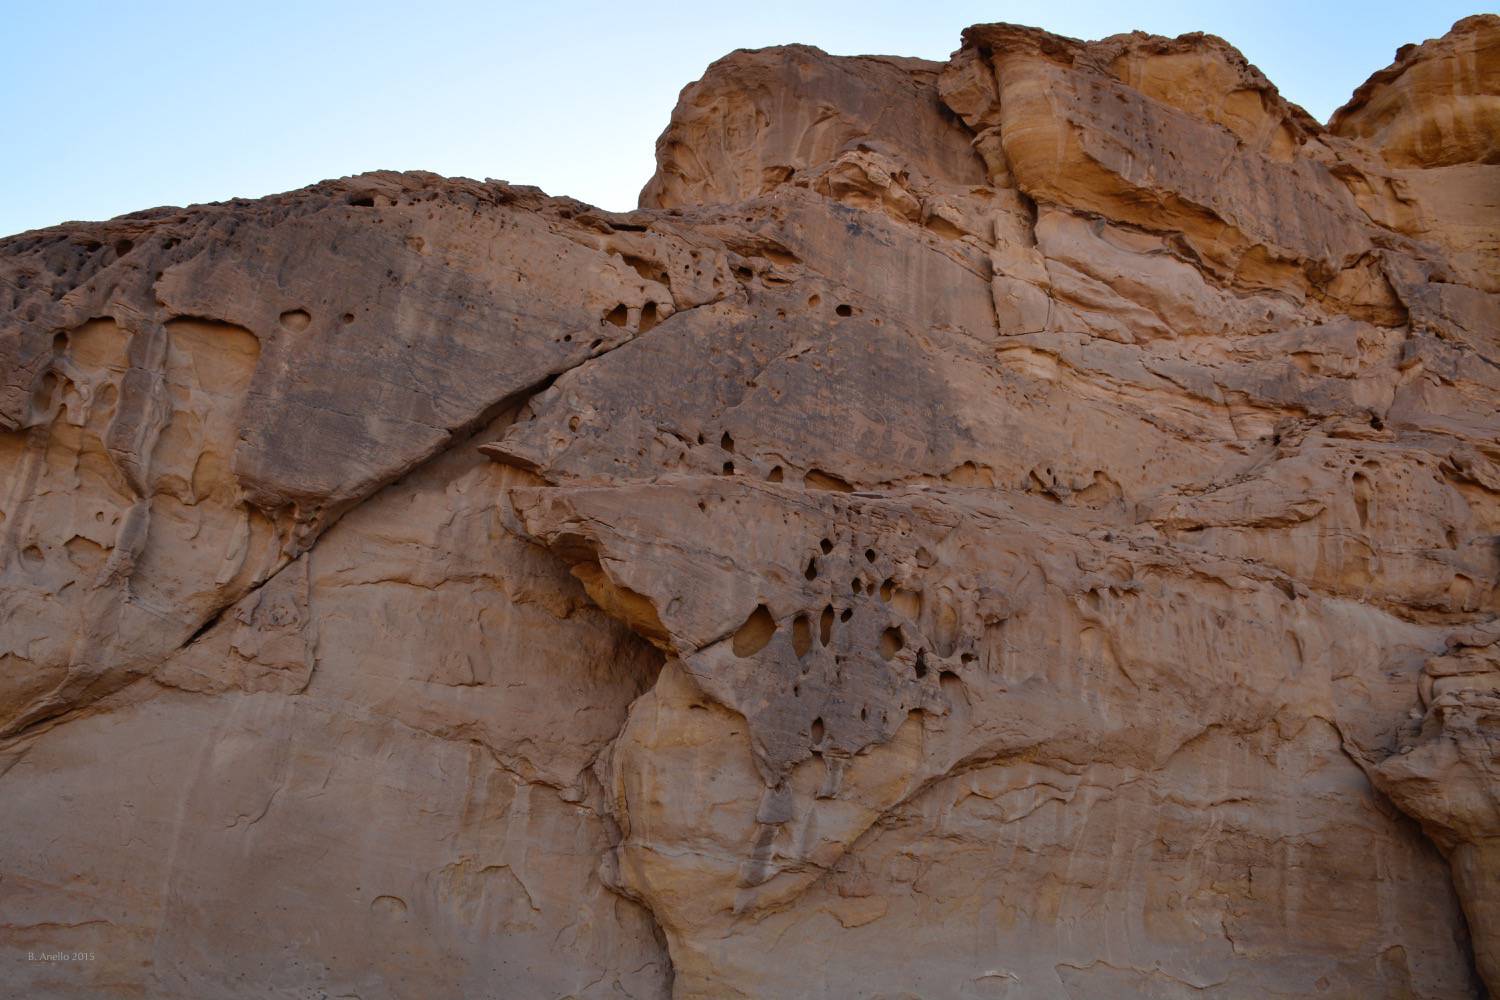 Detail of sandstone formations with rock art